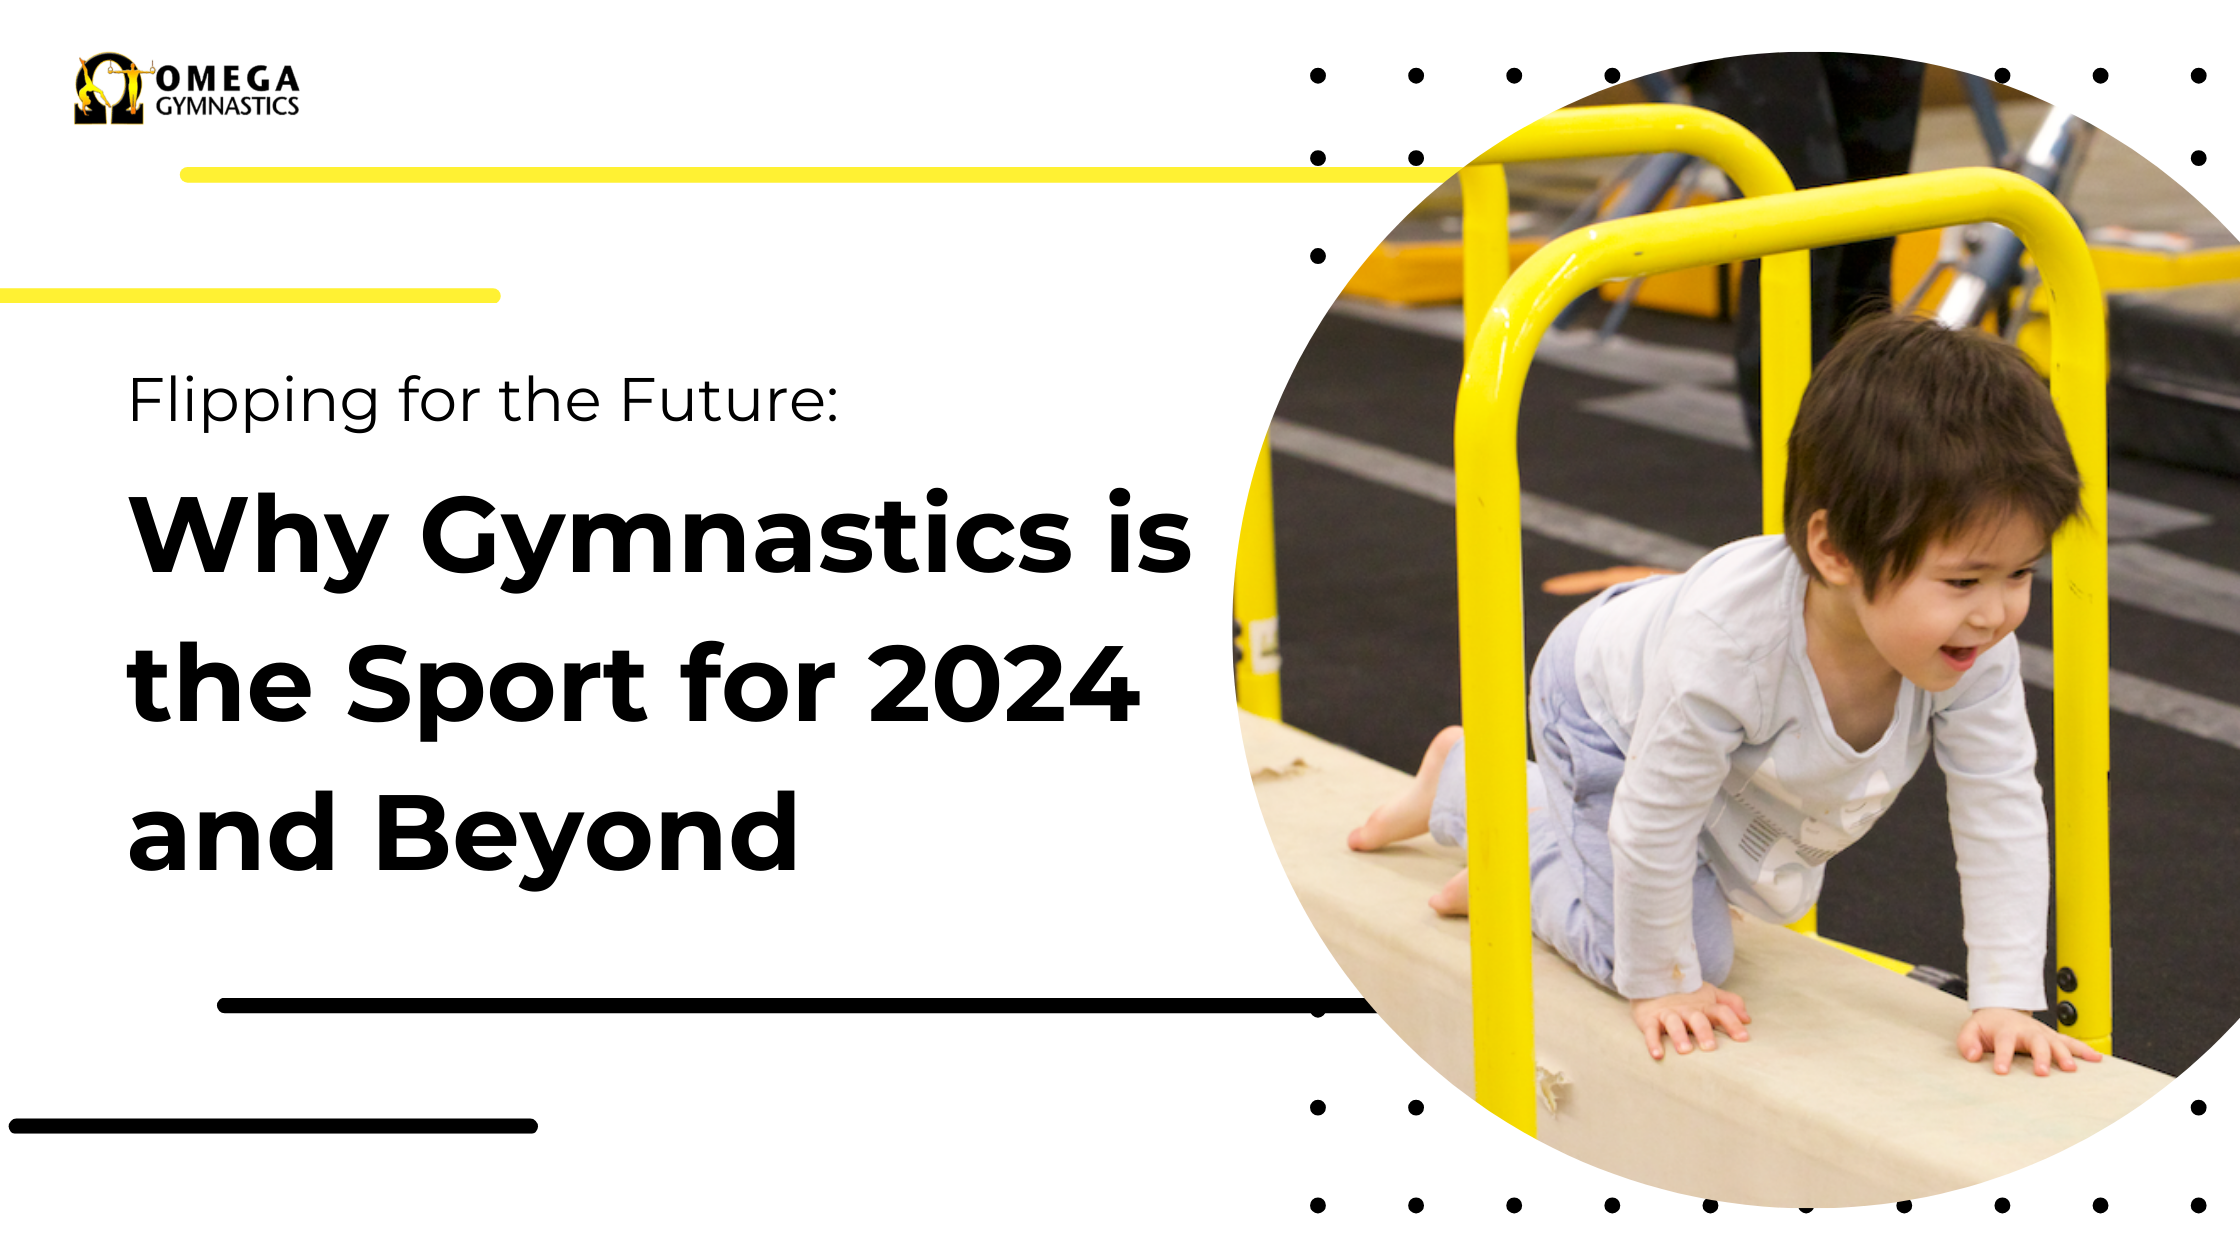 Why Gymnastics is the Sport for 2024 and Beyond